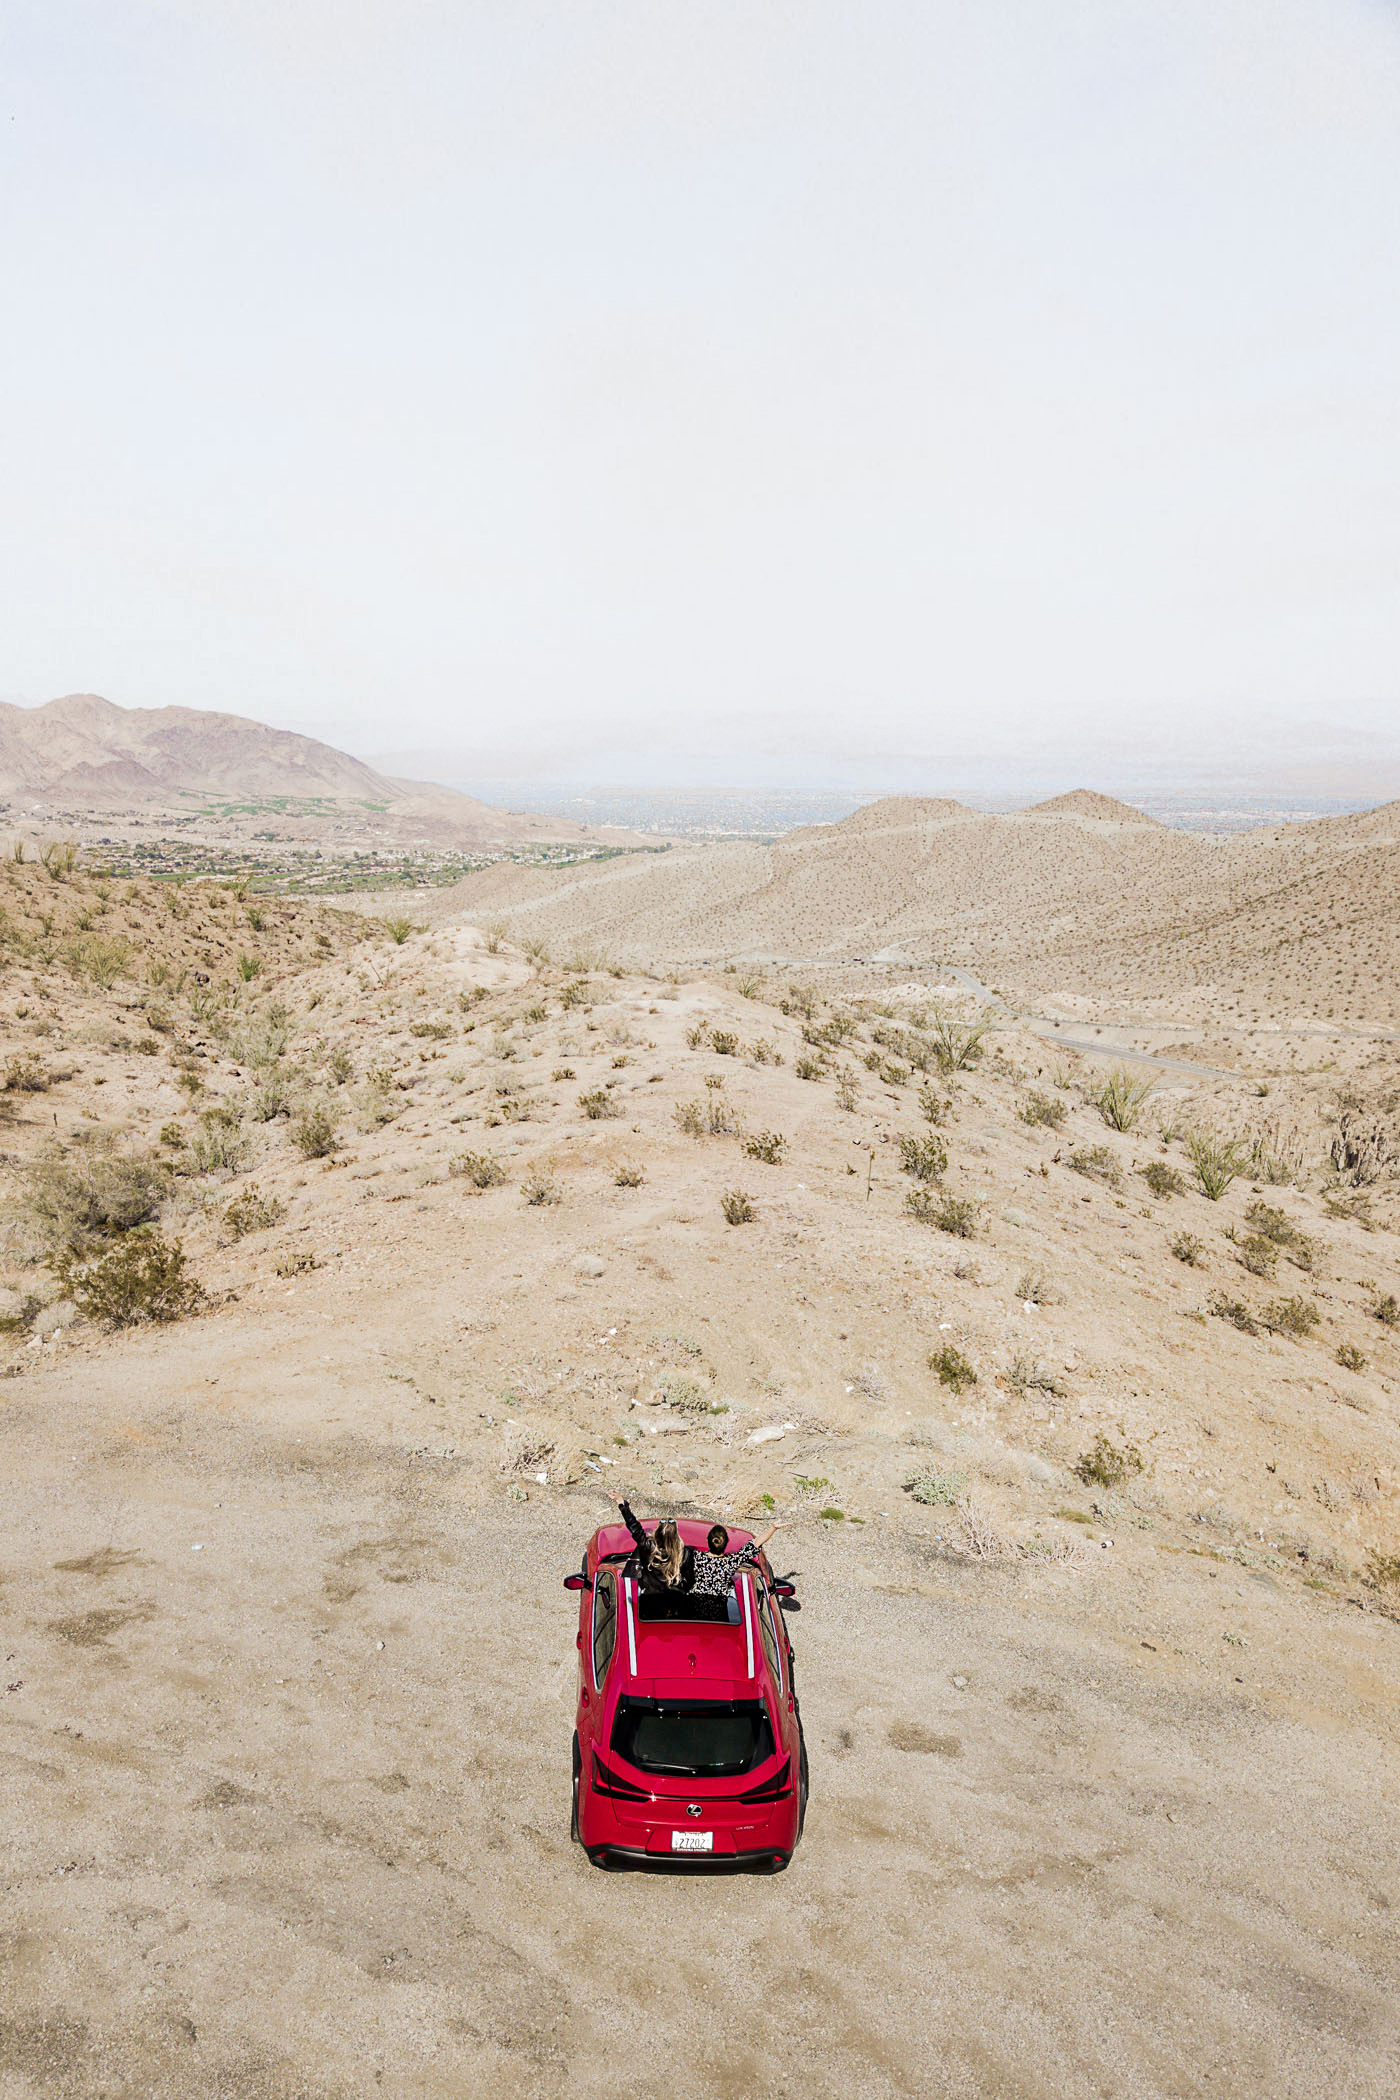 What to do for 3 days in Greater Palm Springs - Driving highway 74 in the Santa Rosa and San Jacinto Mountains National Monument featuring a red 2019 Lexus UX.